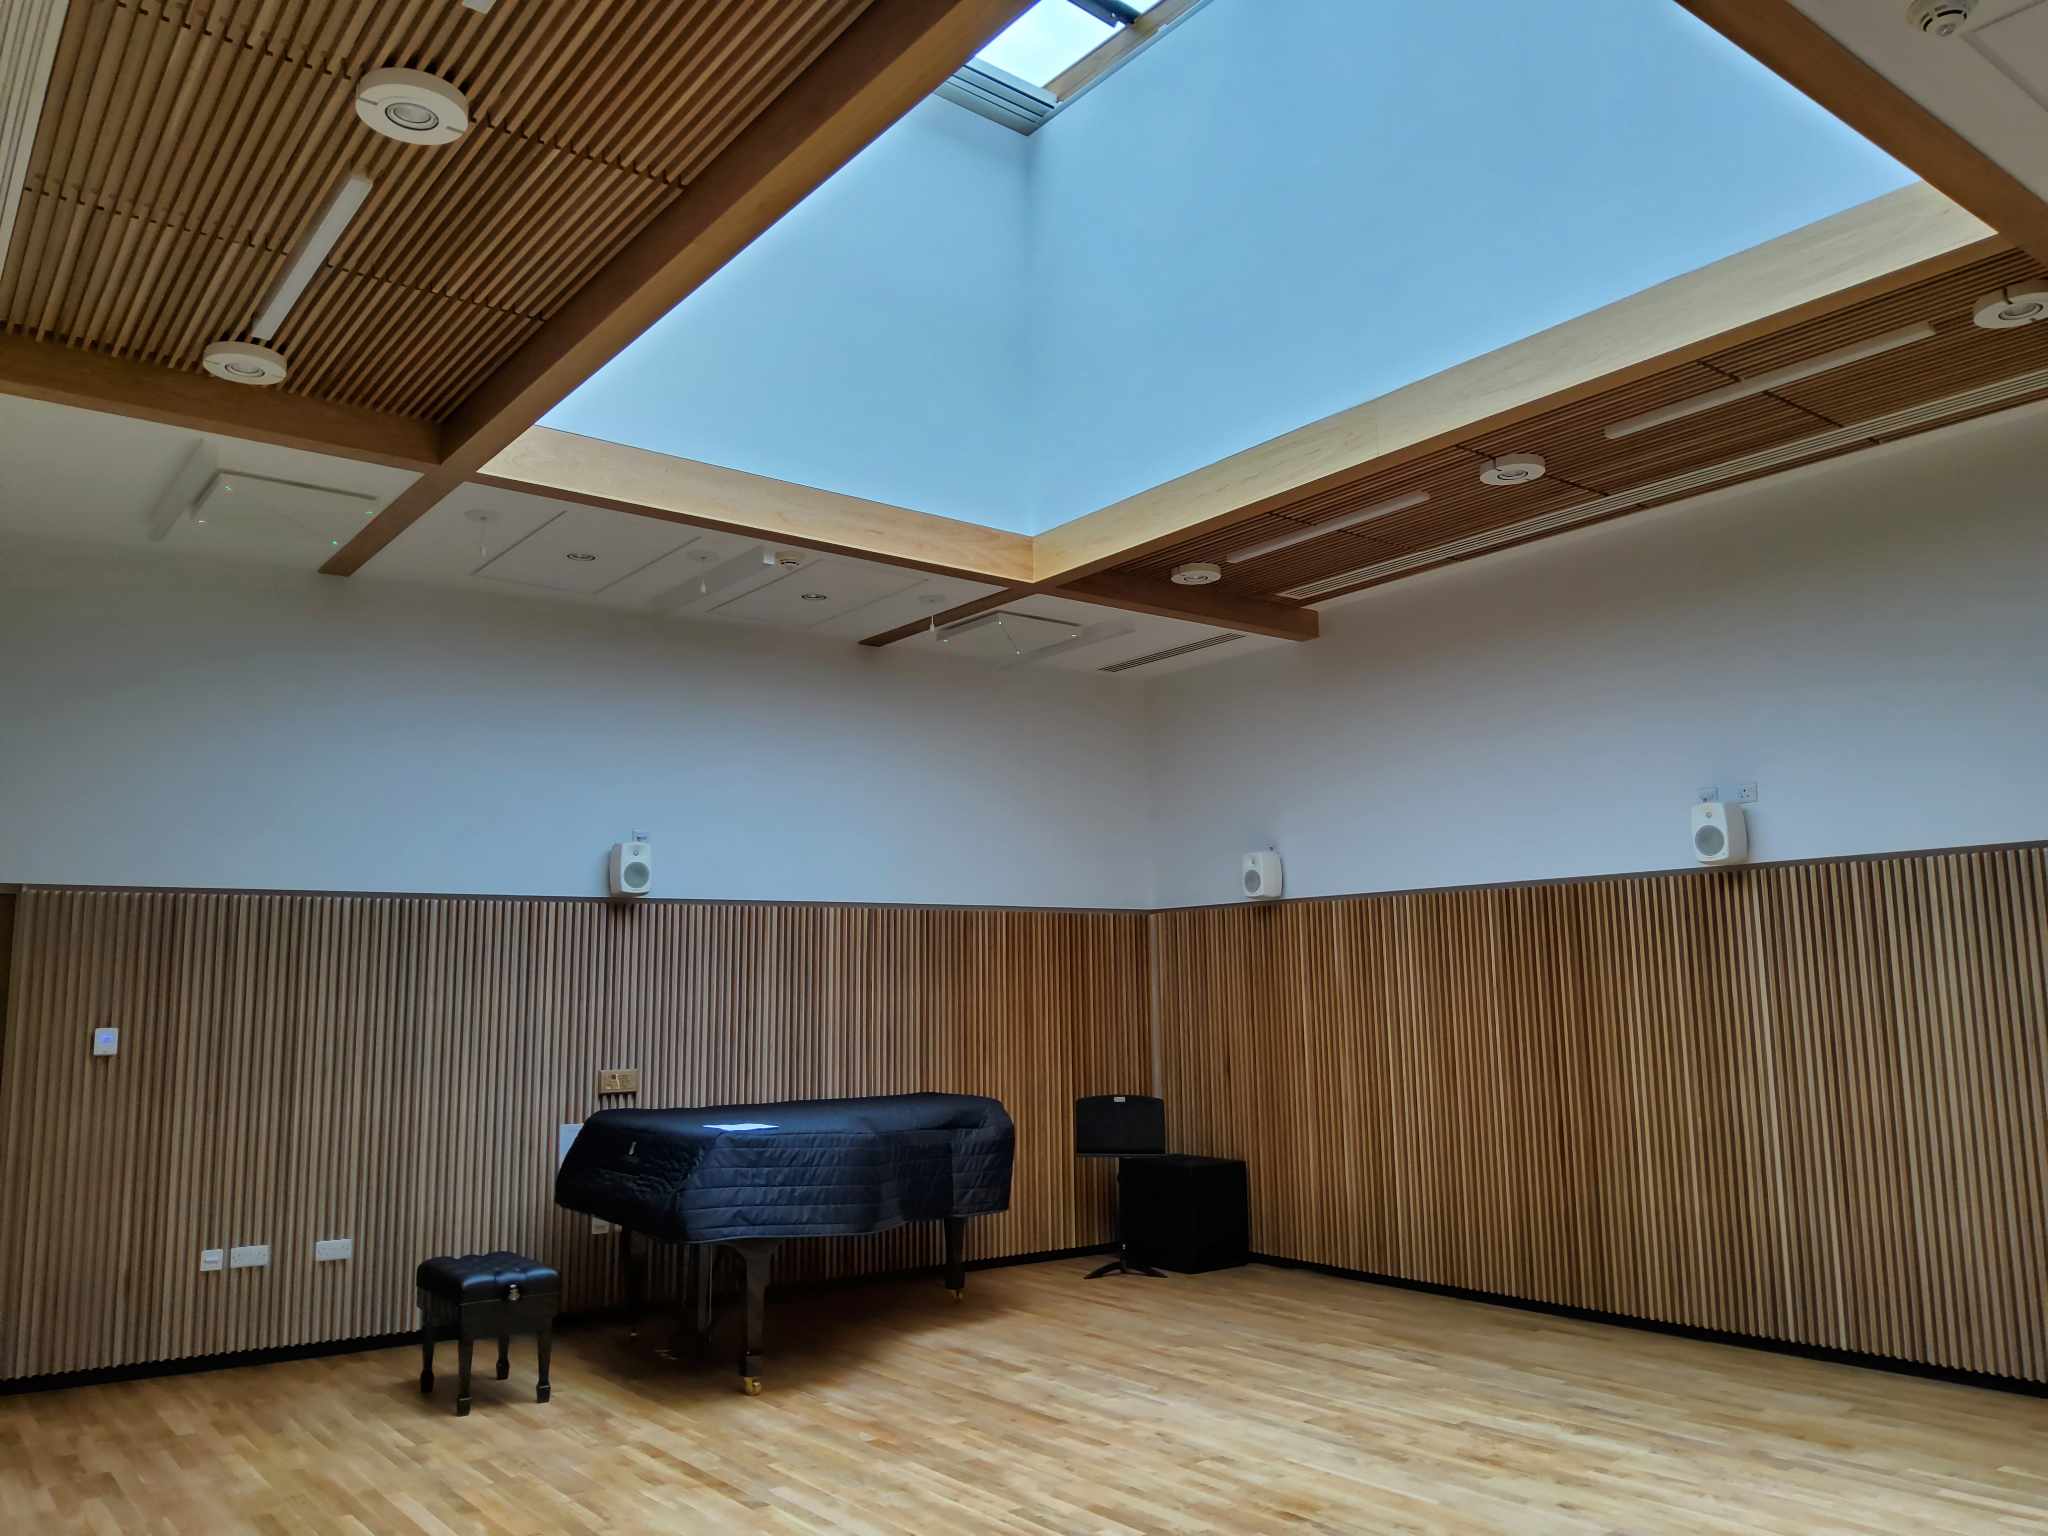 Music and performance space